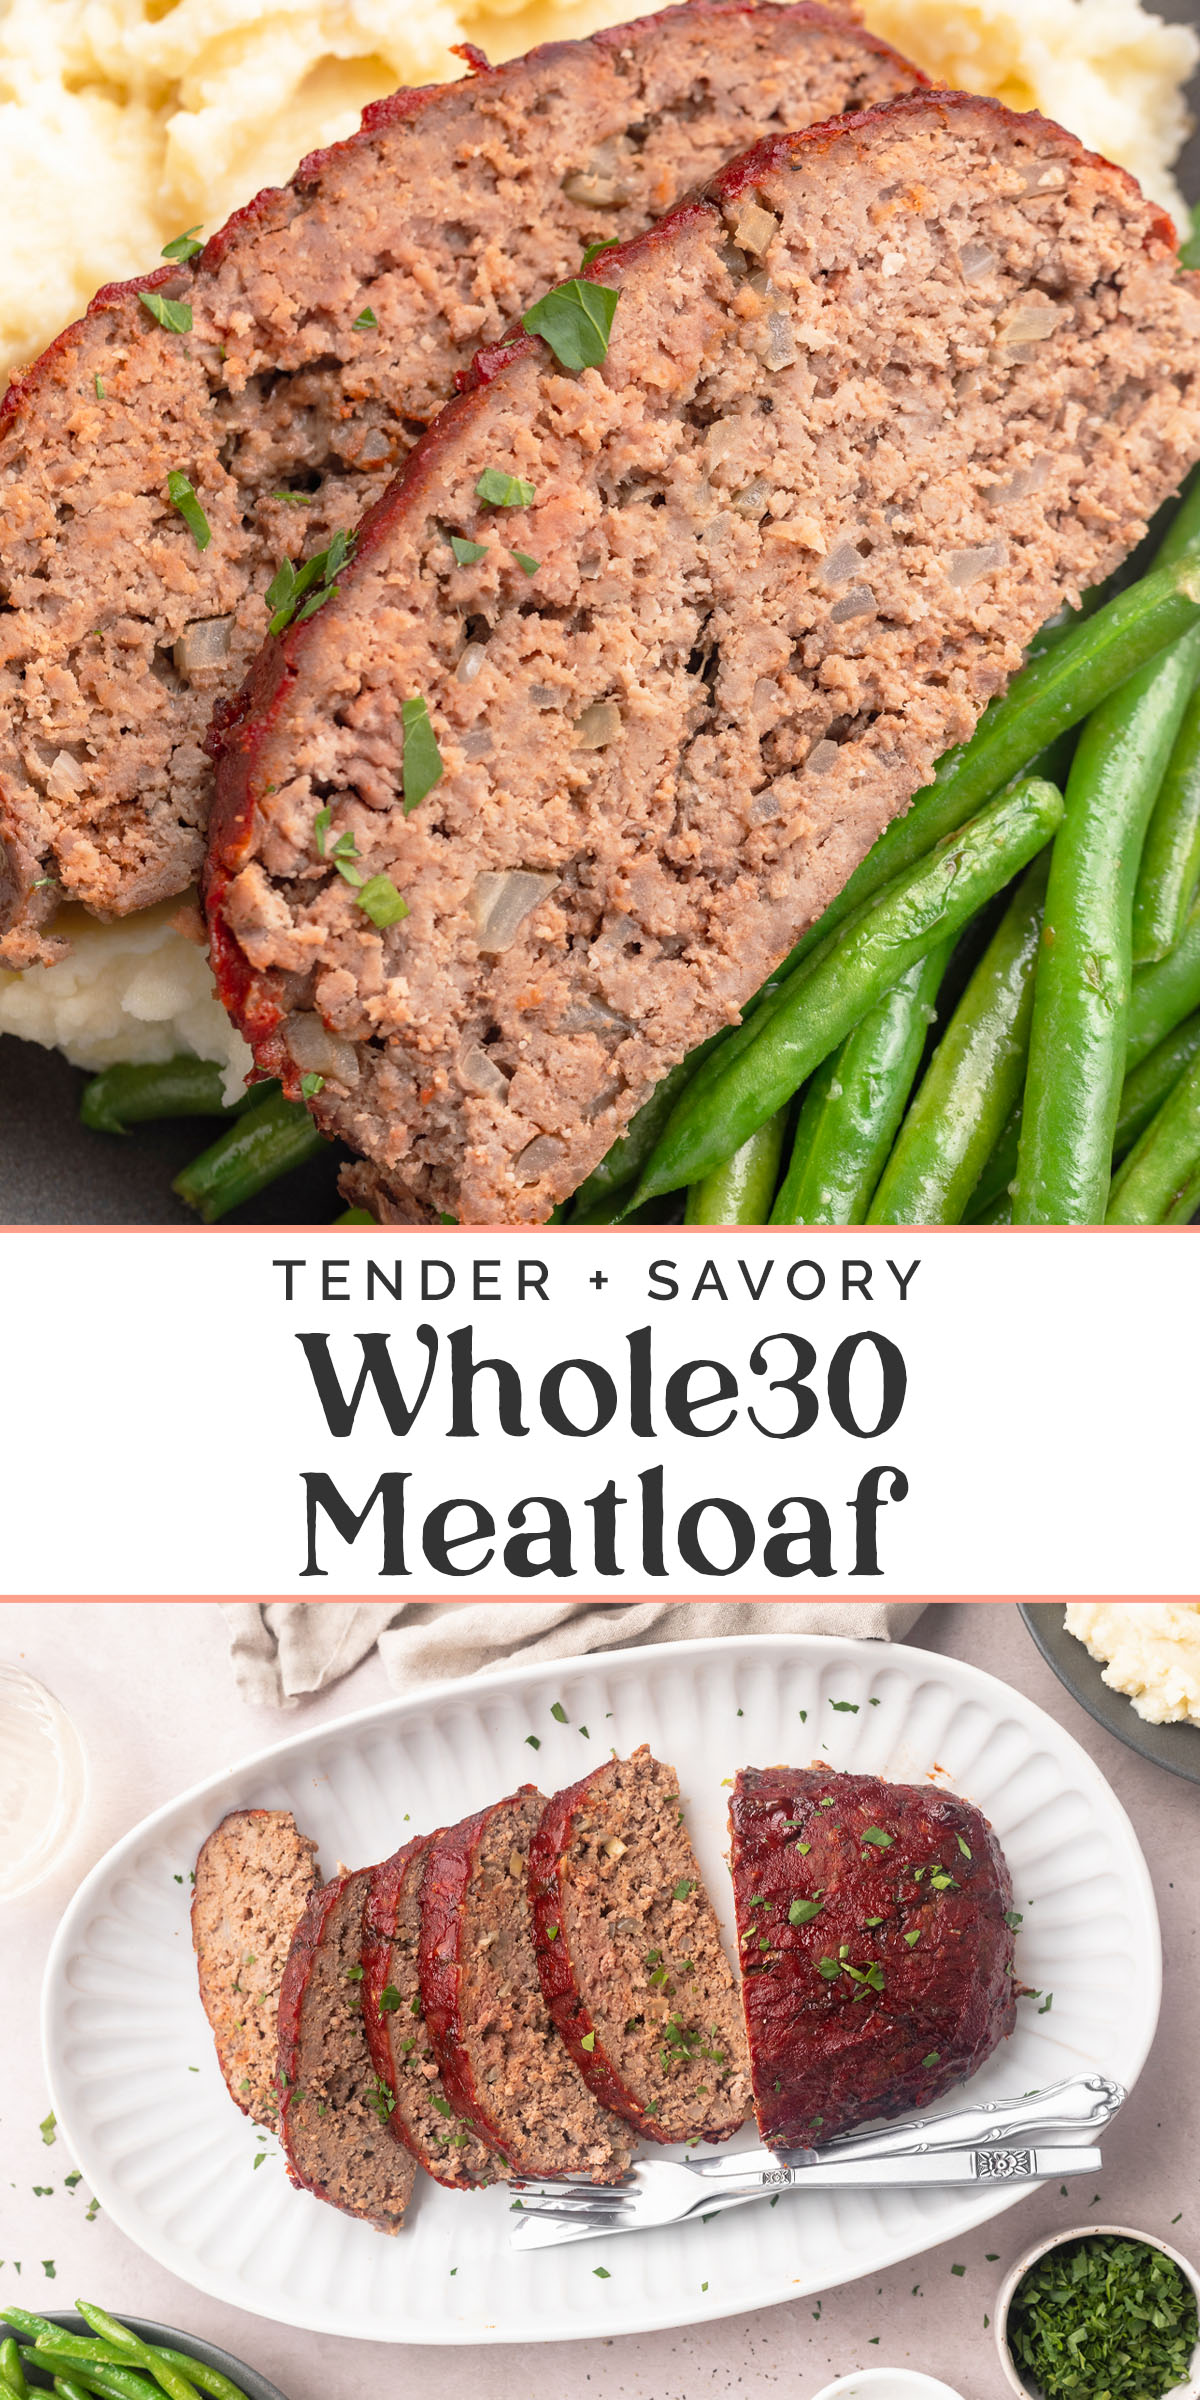 Pin graphic for Whole30 meatloaf.